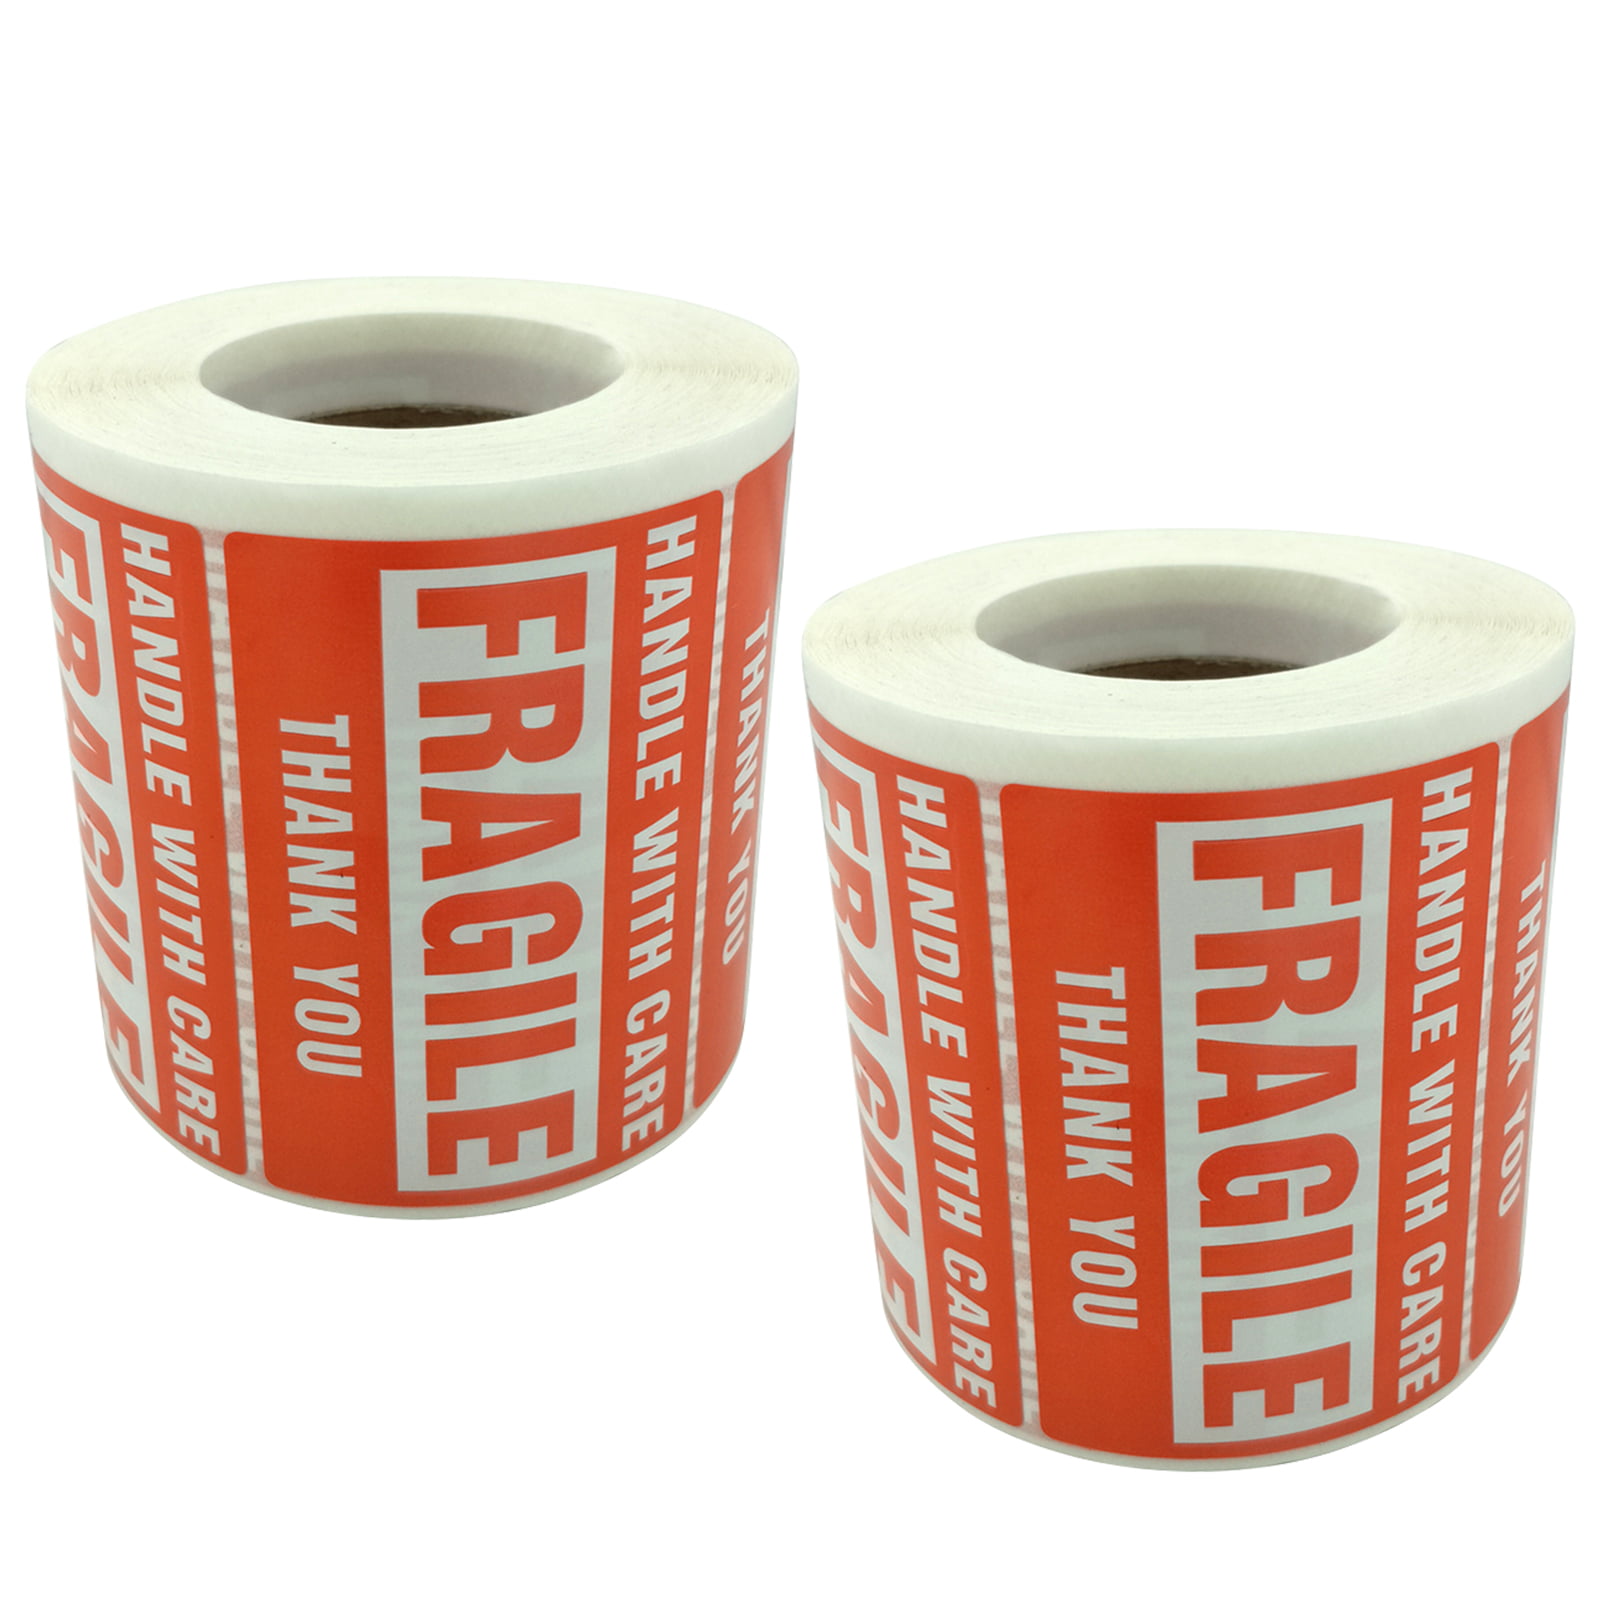 2rolls Packaging Shipping Label Express Warning Fragile Sticker Handle With Care 